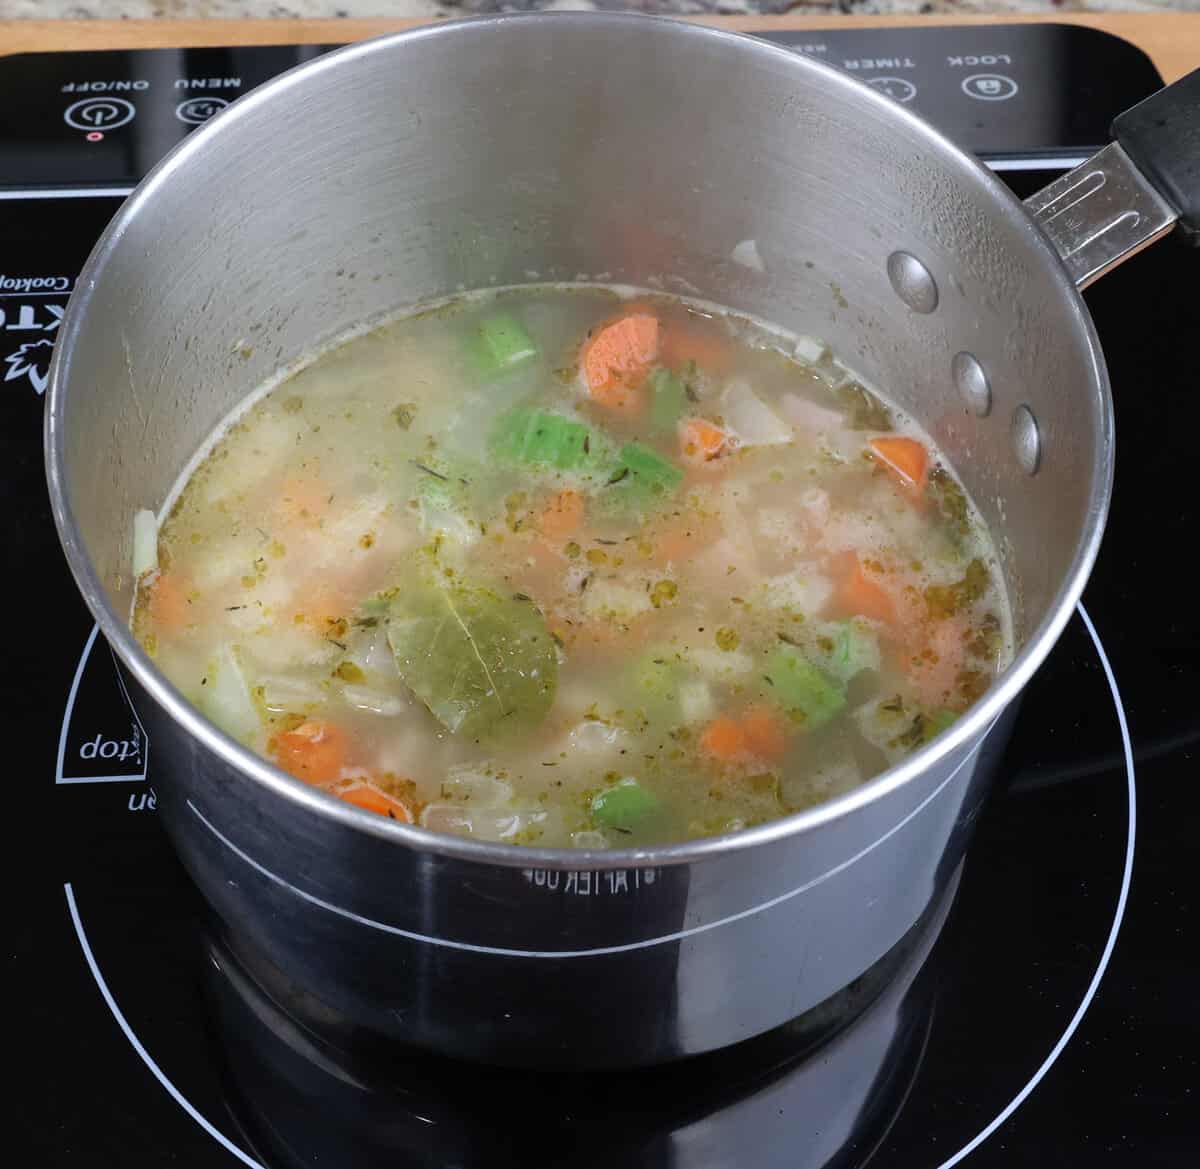 split pea soup simmering in a small pot on the stove.